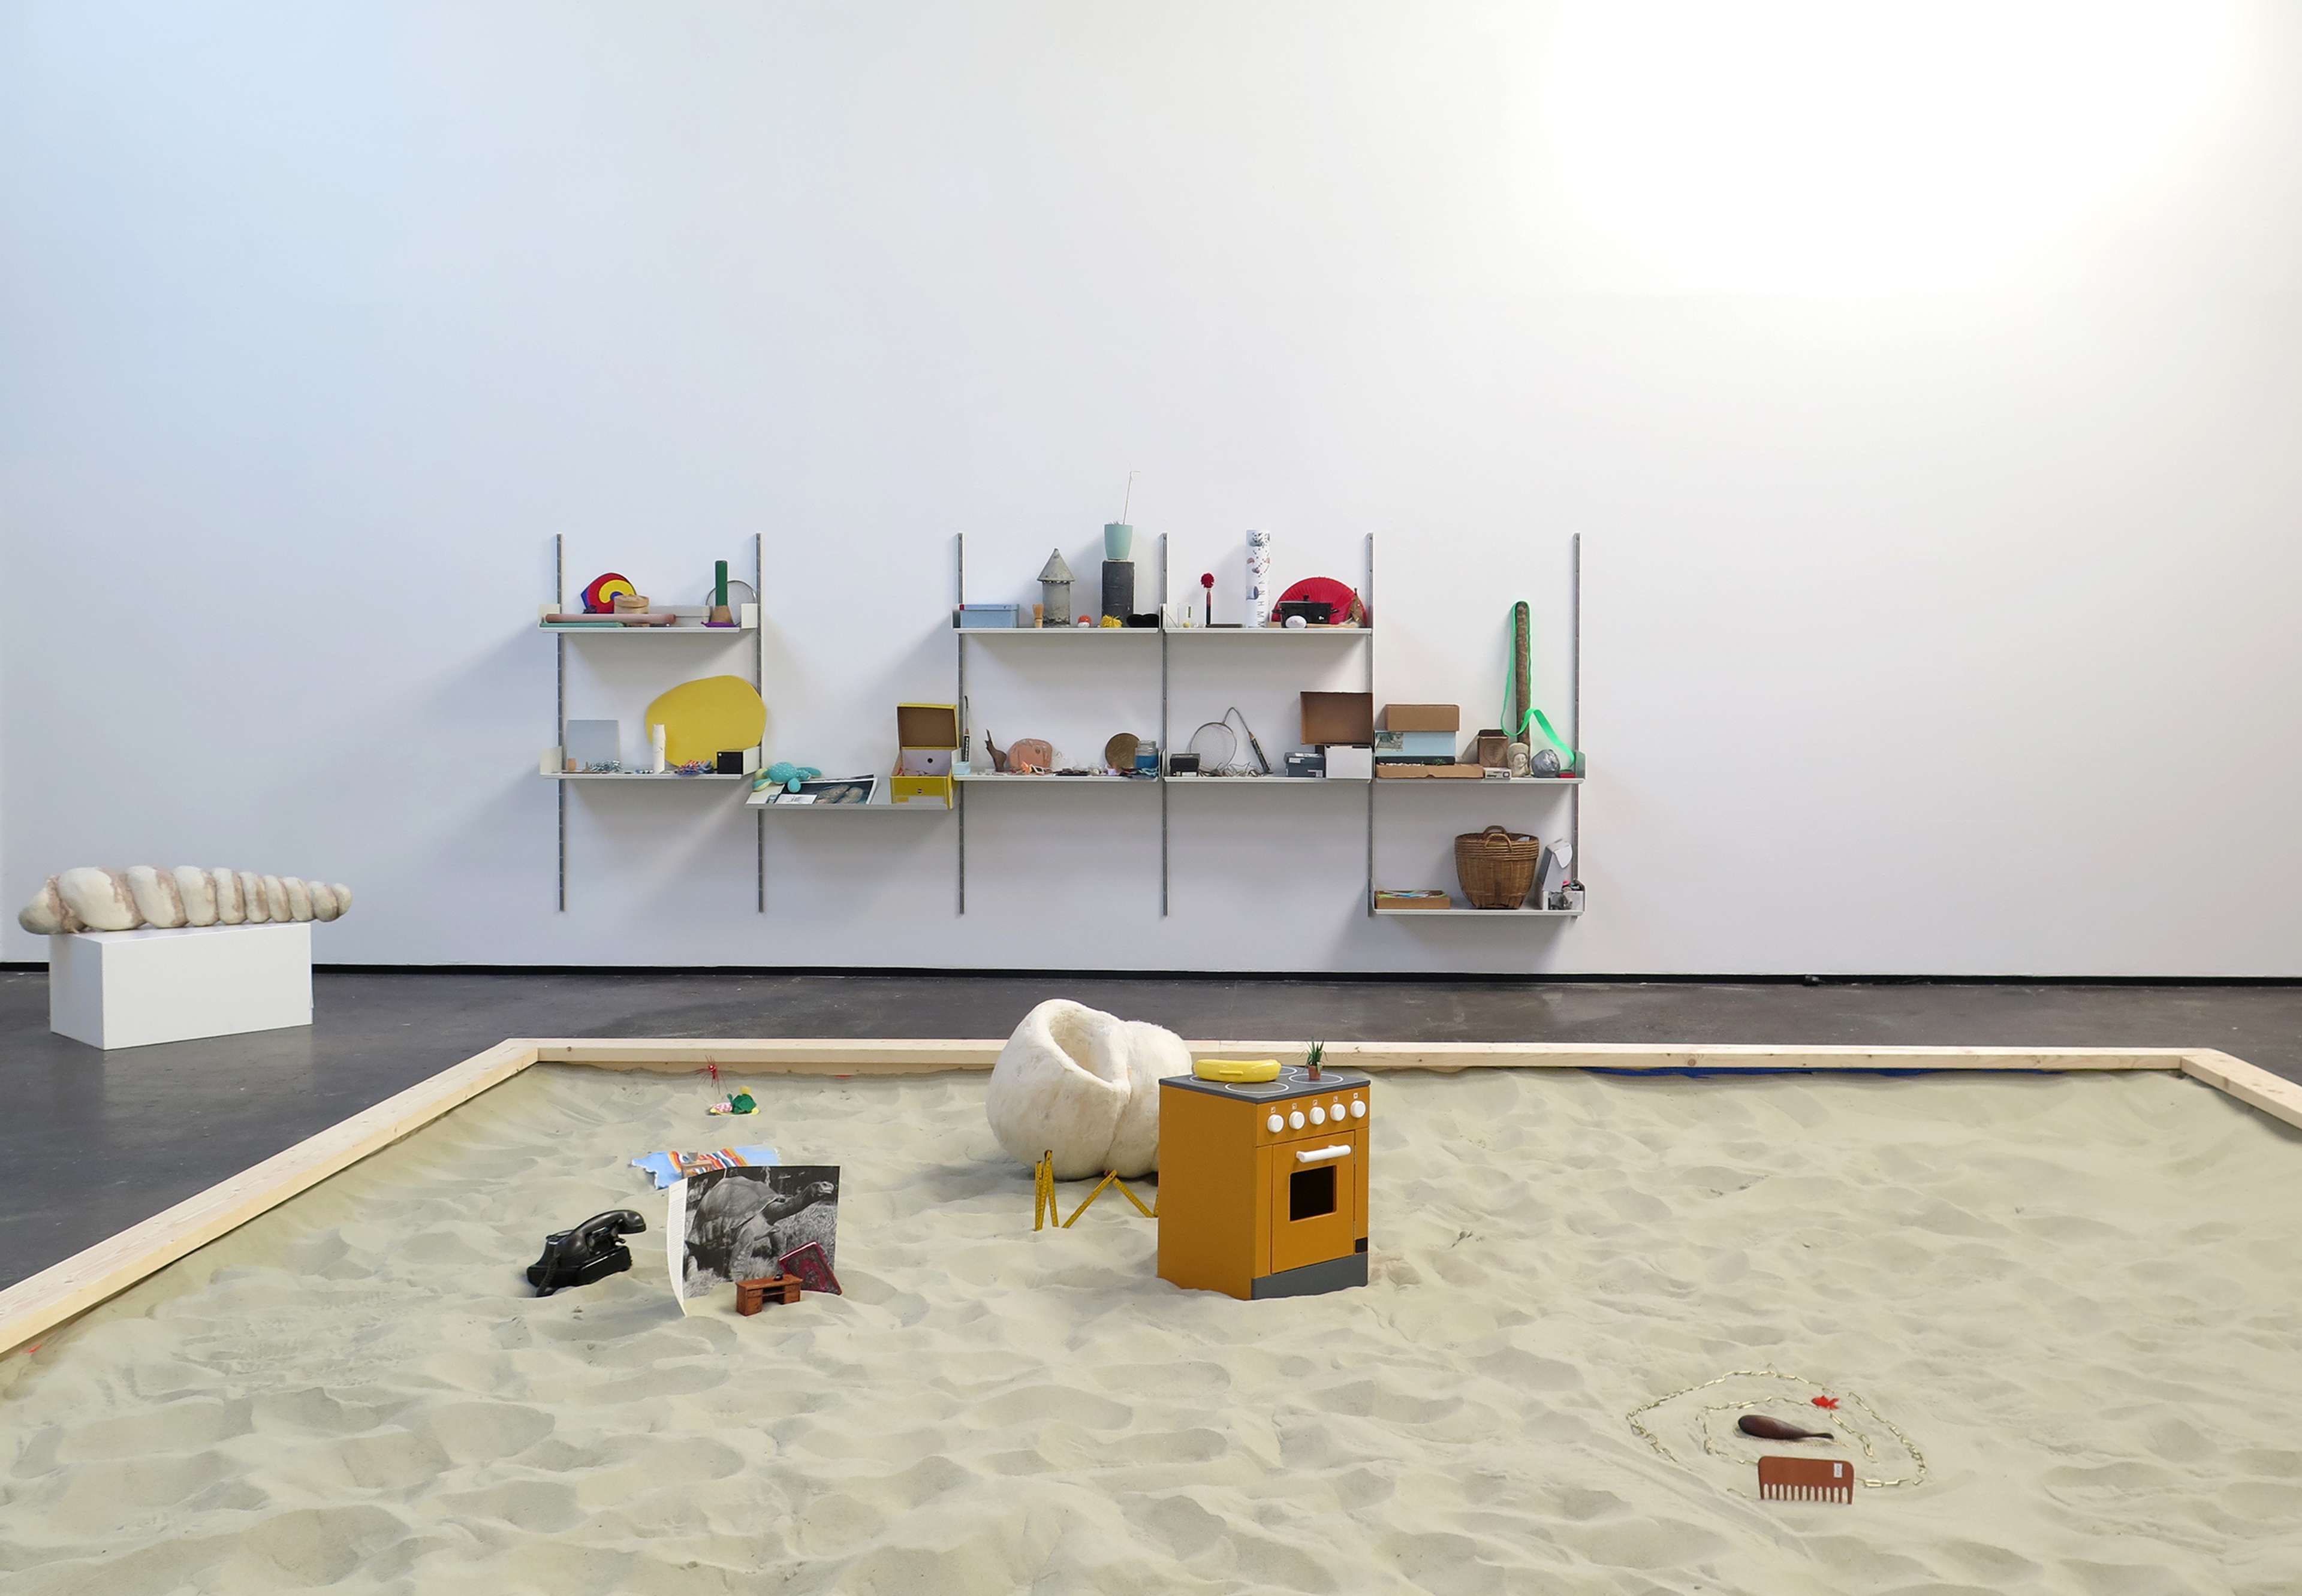 Together with Mirthe Berentsen. Inspired in the sandplay therapy, this installation invites the visitor to select (or not) and object from the collection and place it somewhere in the sandbox.